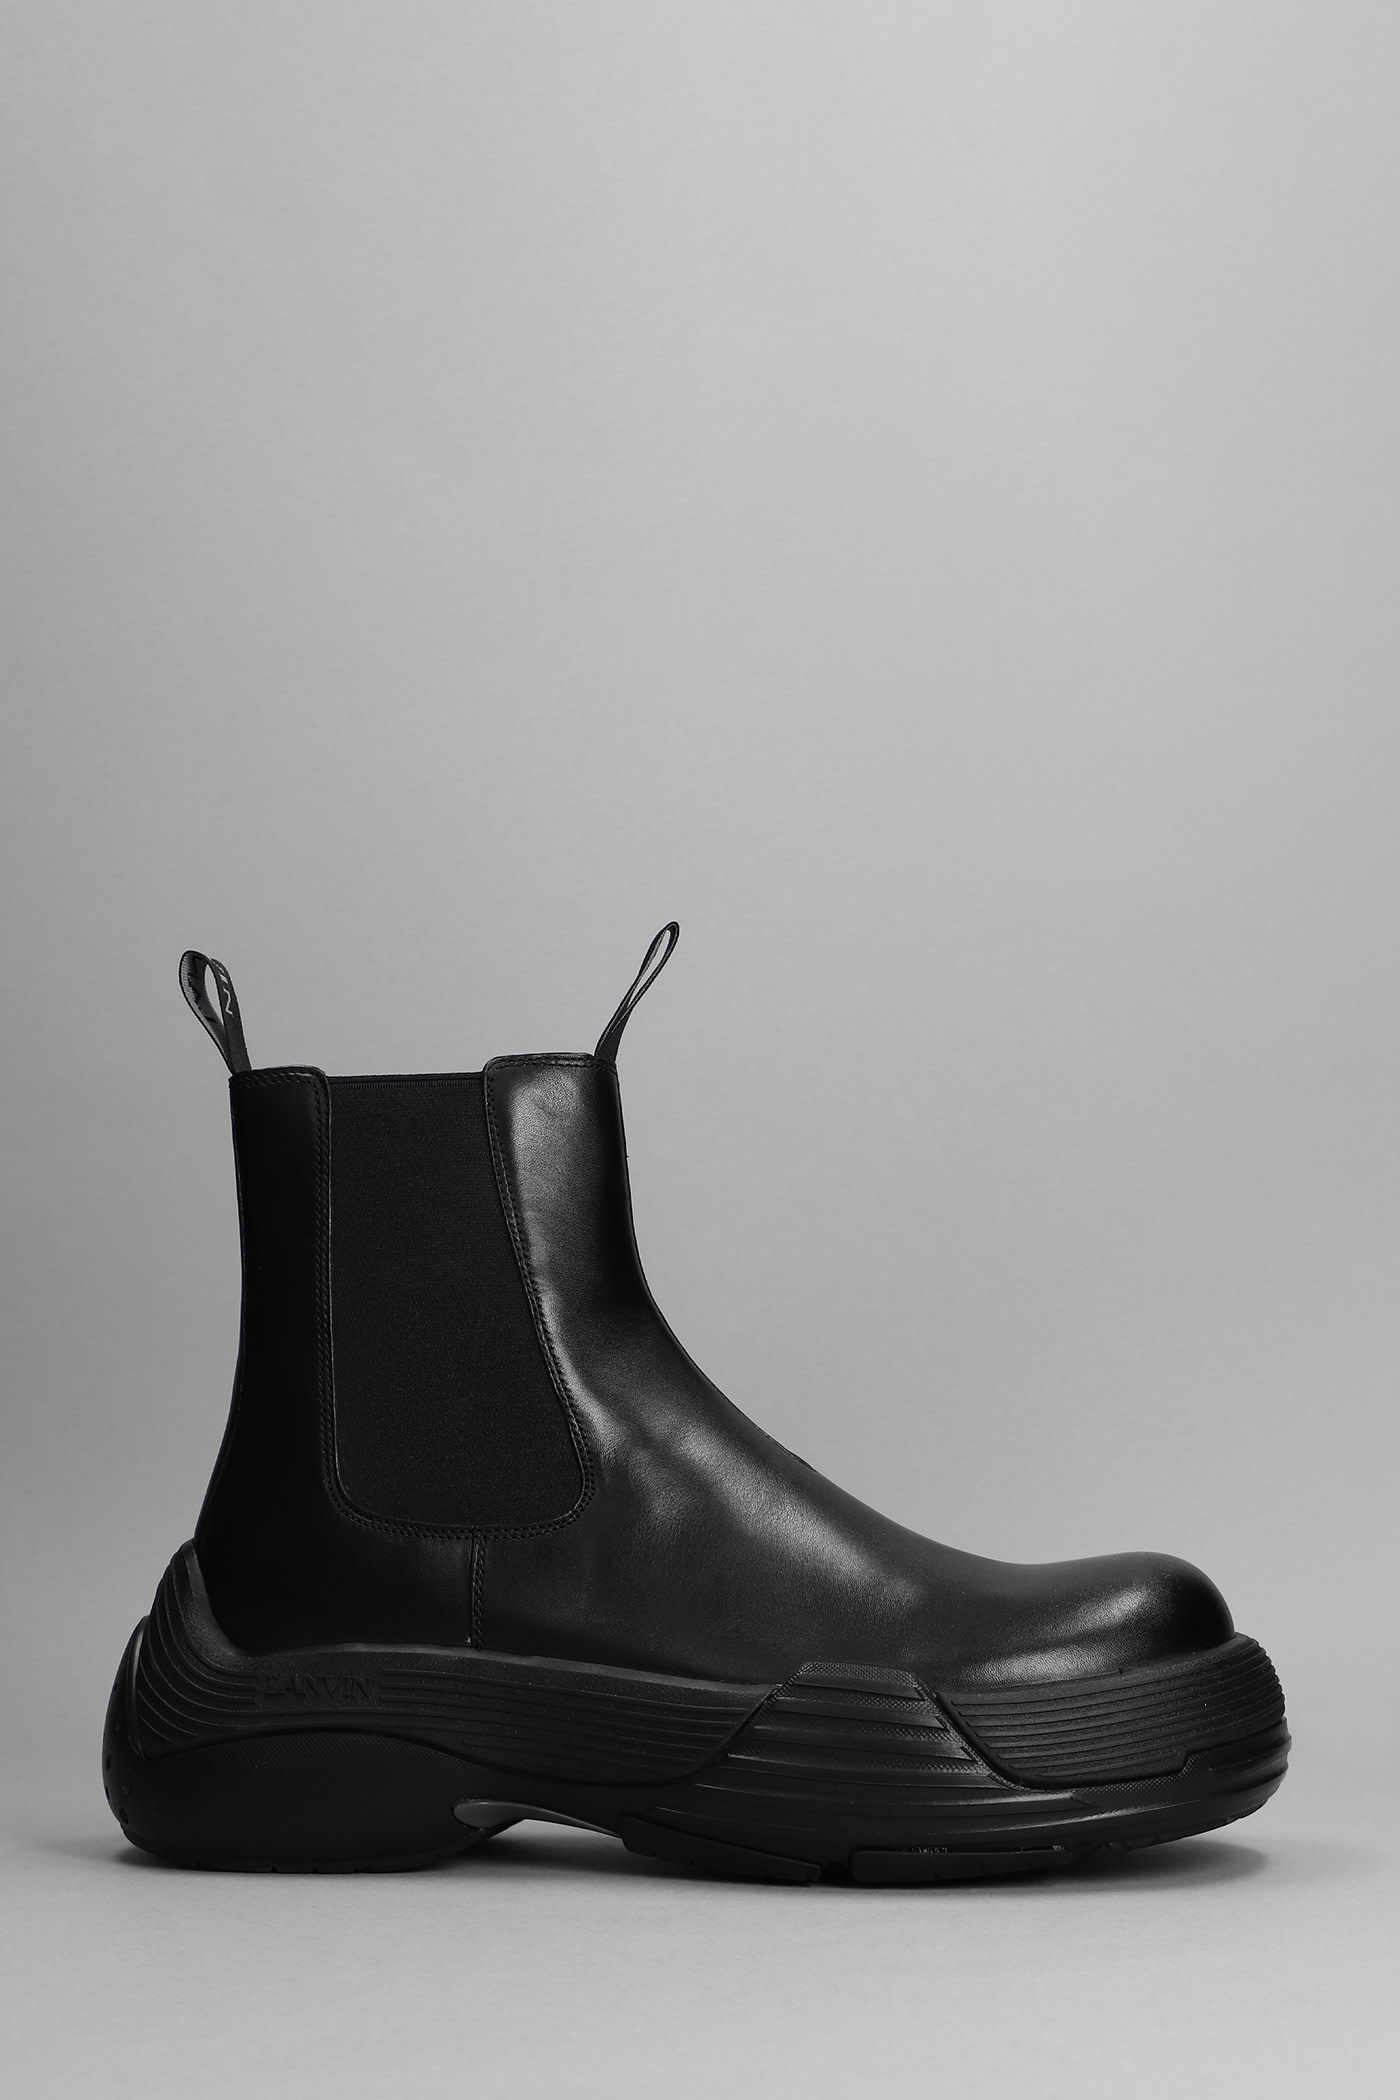 Lanvin Combat Boots In Black Leather